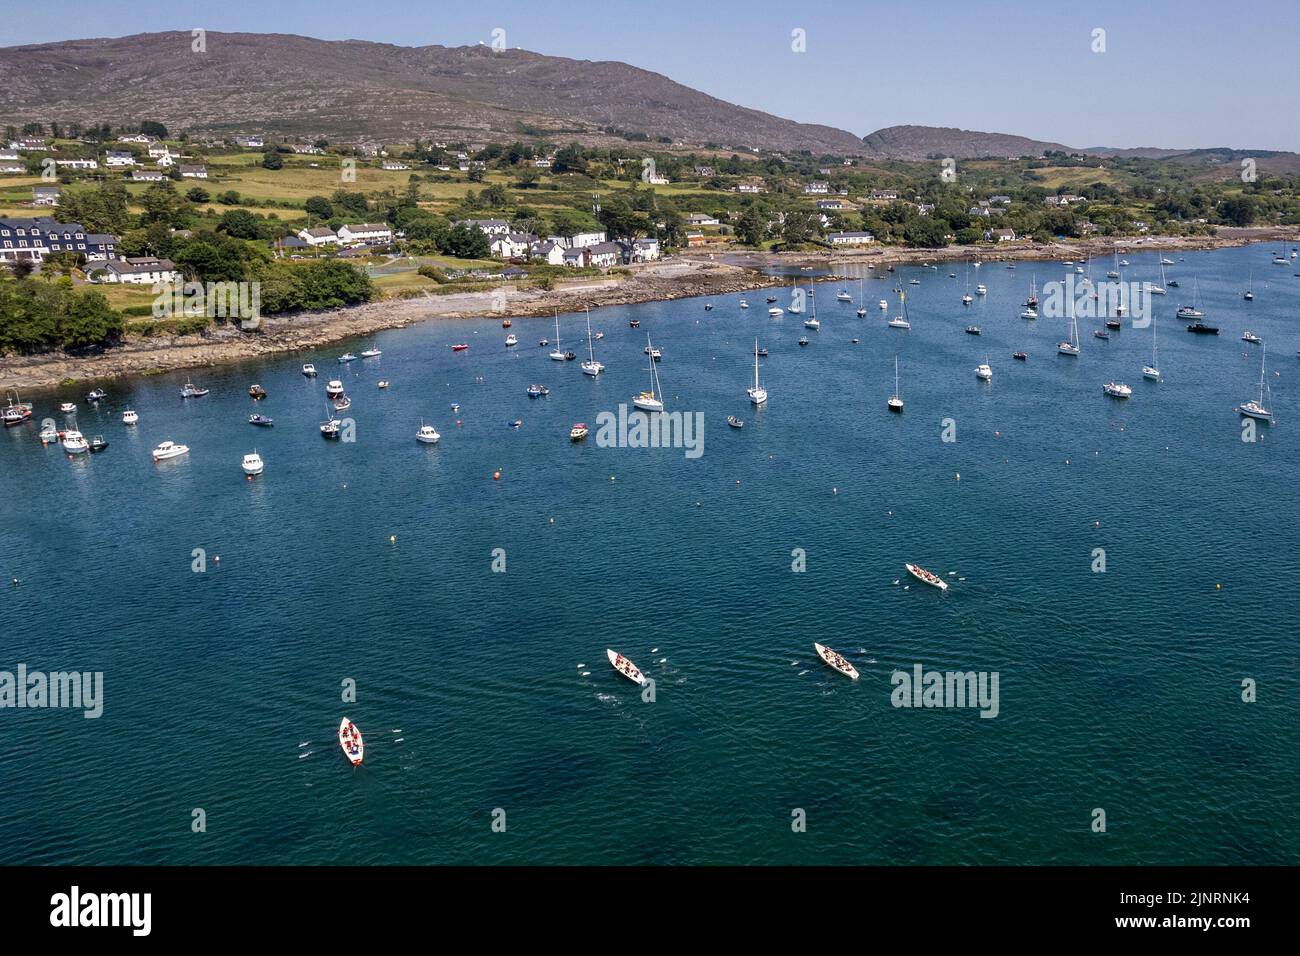 Schull, West Cork, Ireland. 13th Aug, 2022. The 2022 Irish Coastal Rowing Championships is taking place this weekend in Schull, West Cork. A total of 290 crews from different clubs are taking part in the event which finishes Sunday evening. The racing took place under the gaze of Mount Gabriel. Credit: AG News/Alamy Live News Stock Photo